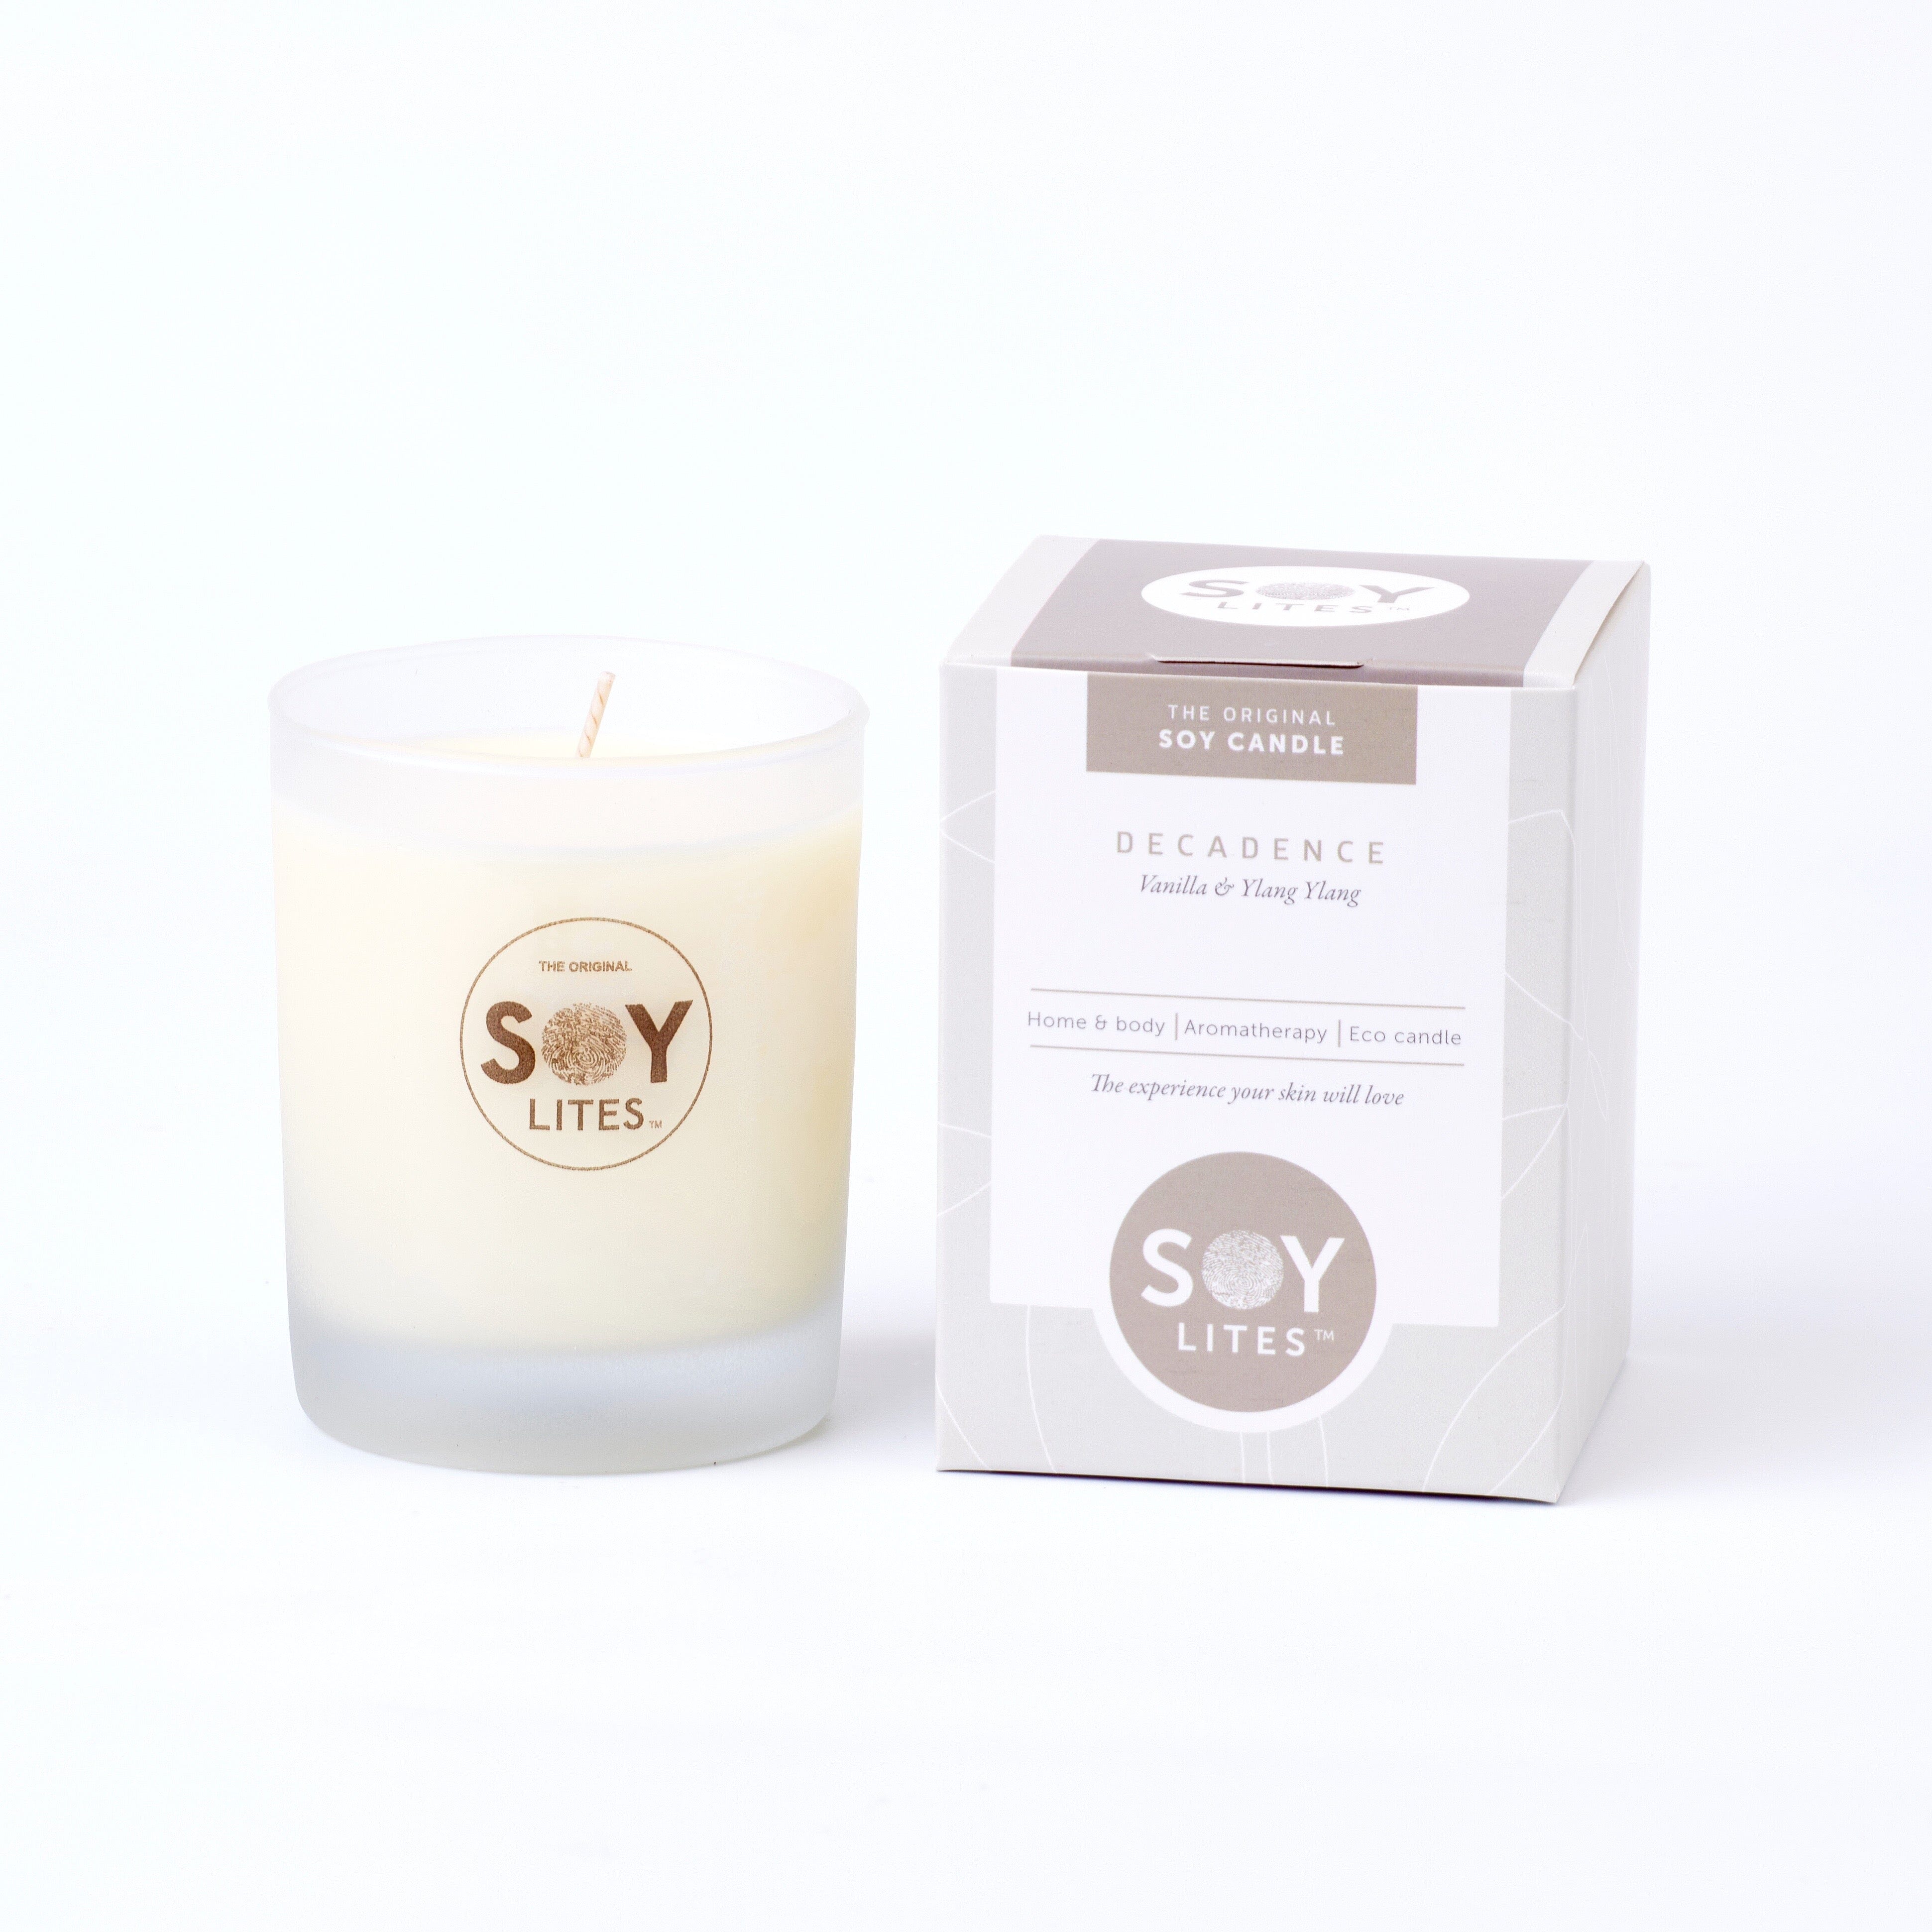 SoyLites 'Decadence' Soy Candle with Vanilla & Ylang Ylang Candles SoyLites 